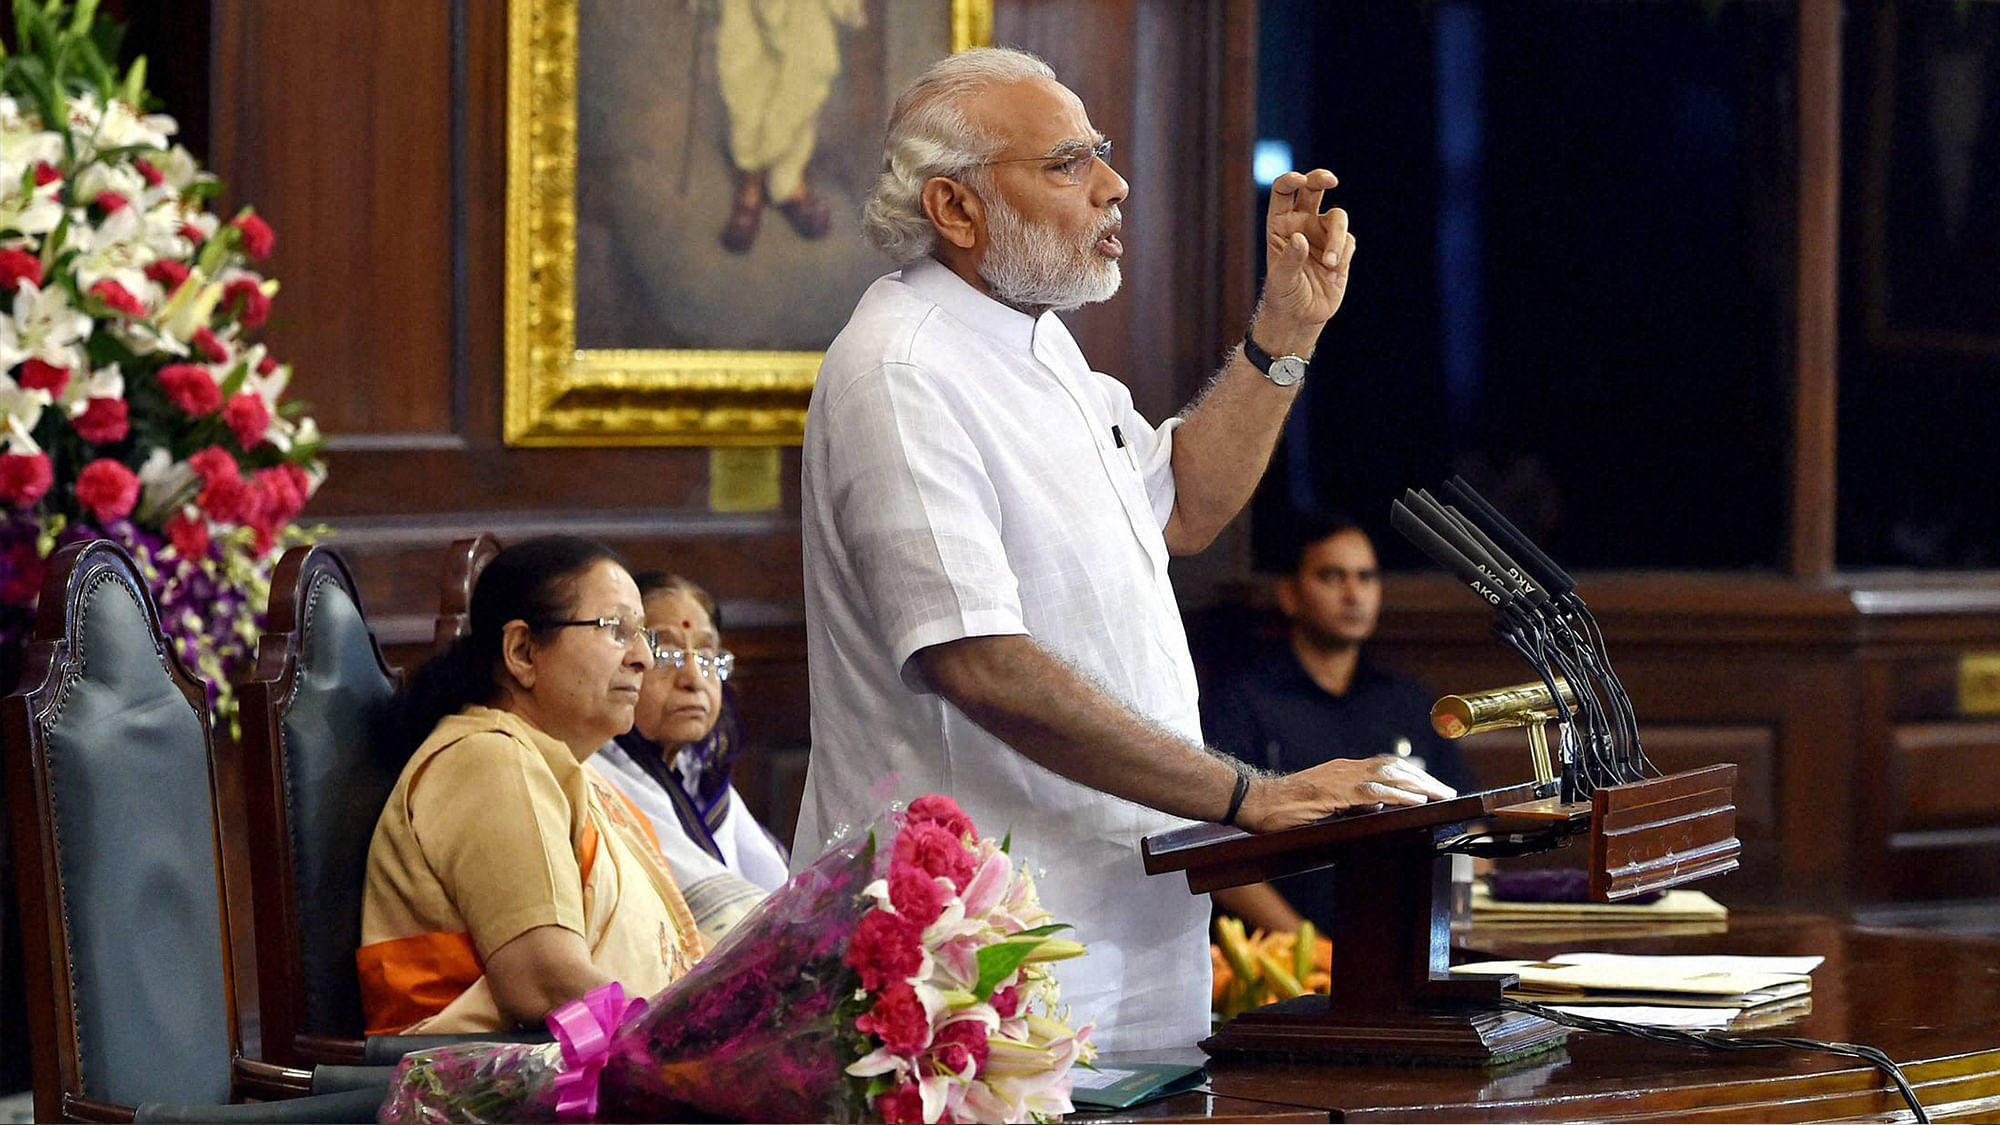 rime Minister Narendra Modi addressing at the valedictory session of the National Conference of Women Legislators, at the Central Hall of Parliament, in New Delhi on Sunday. (Photo: PTI)